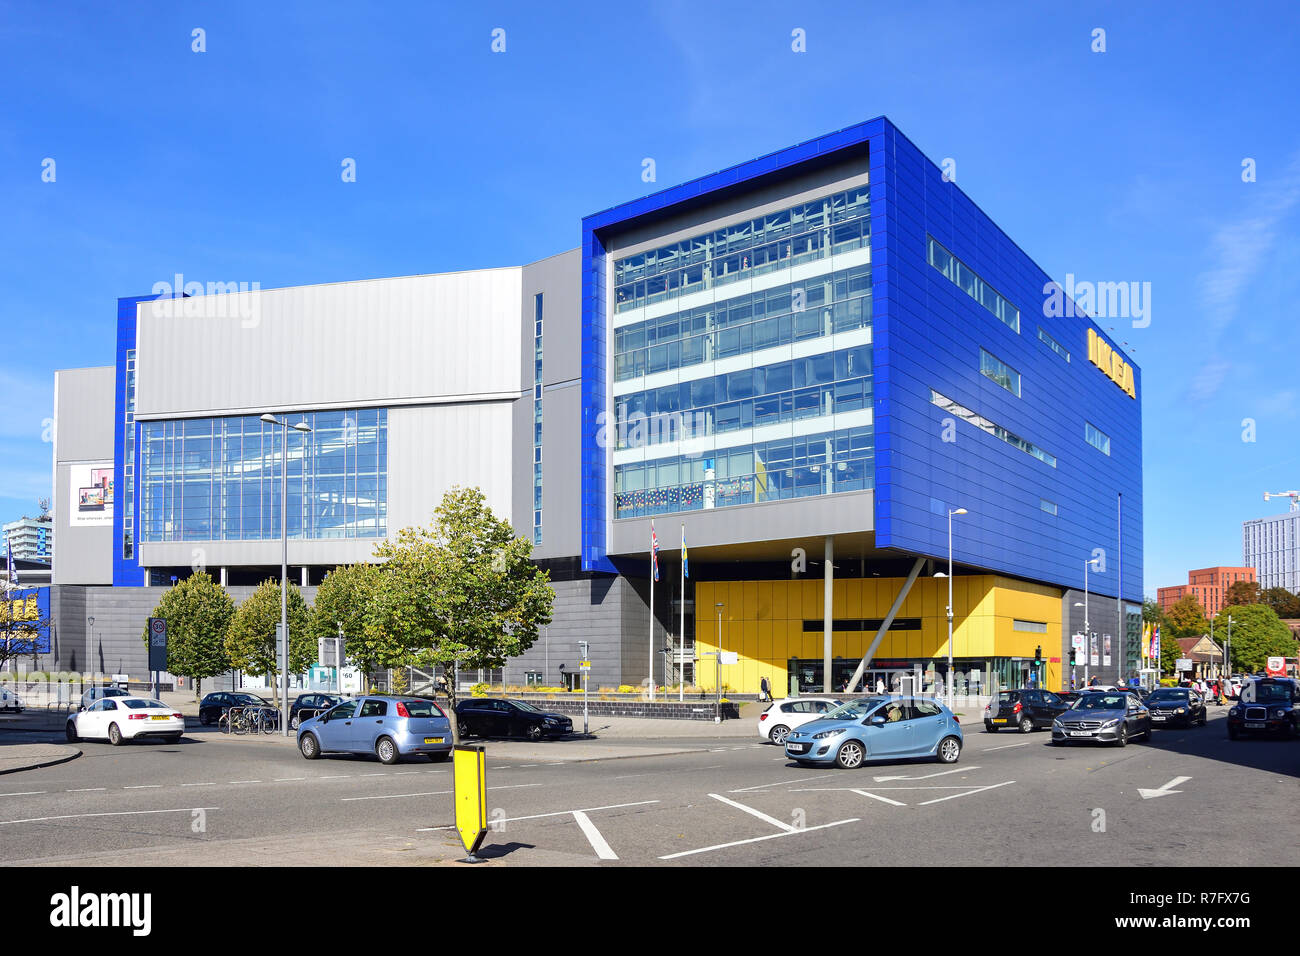 Ikea Coventry store, Croft Road, Coventry, West Midlands, England, United Kingdom Stock Photo